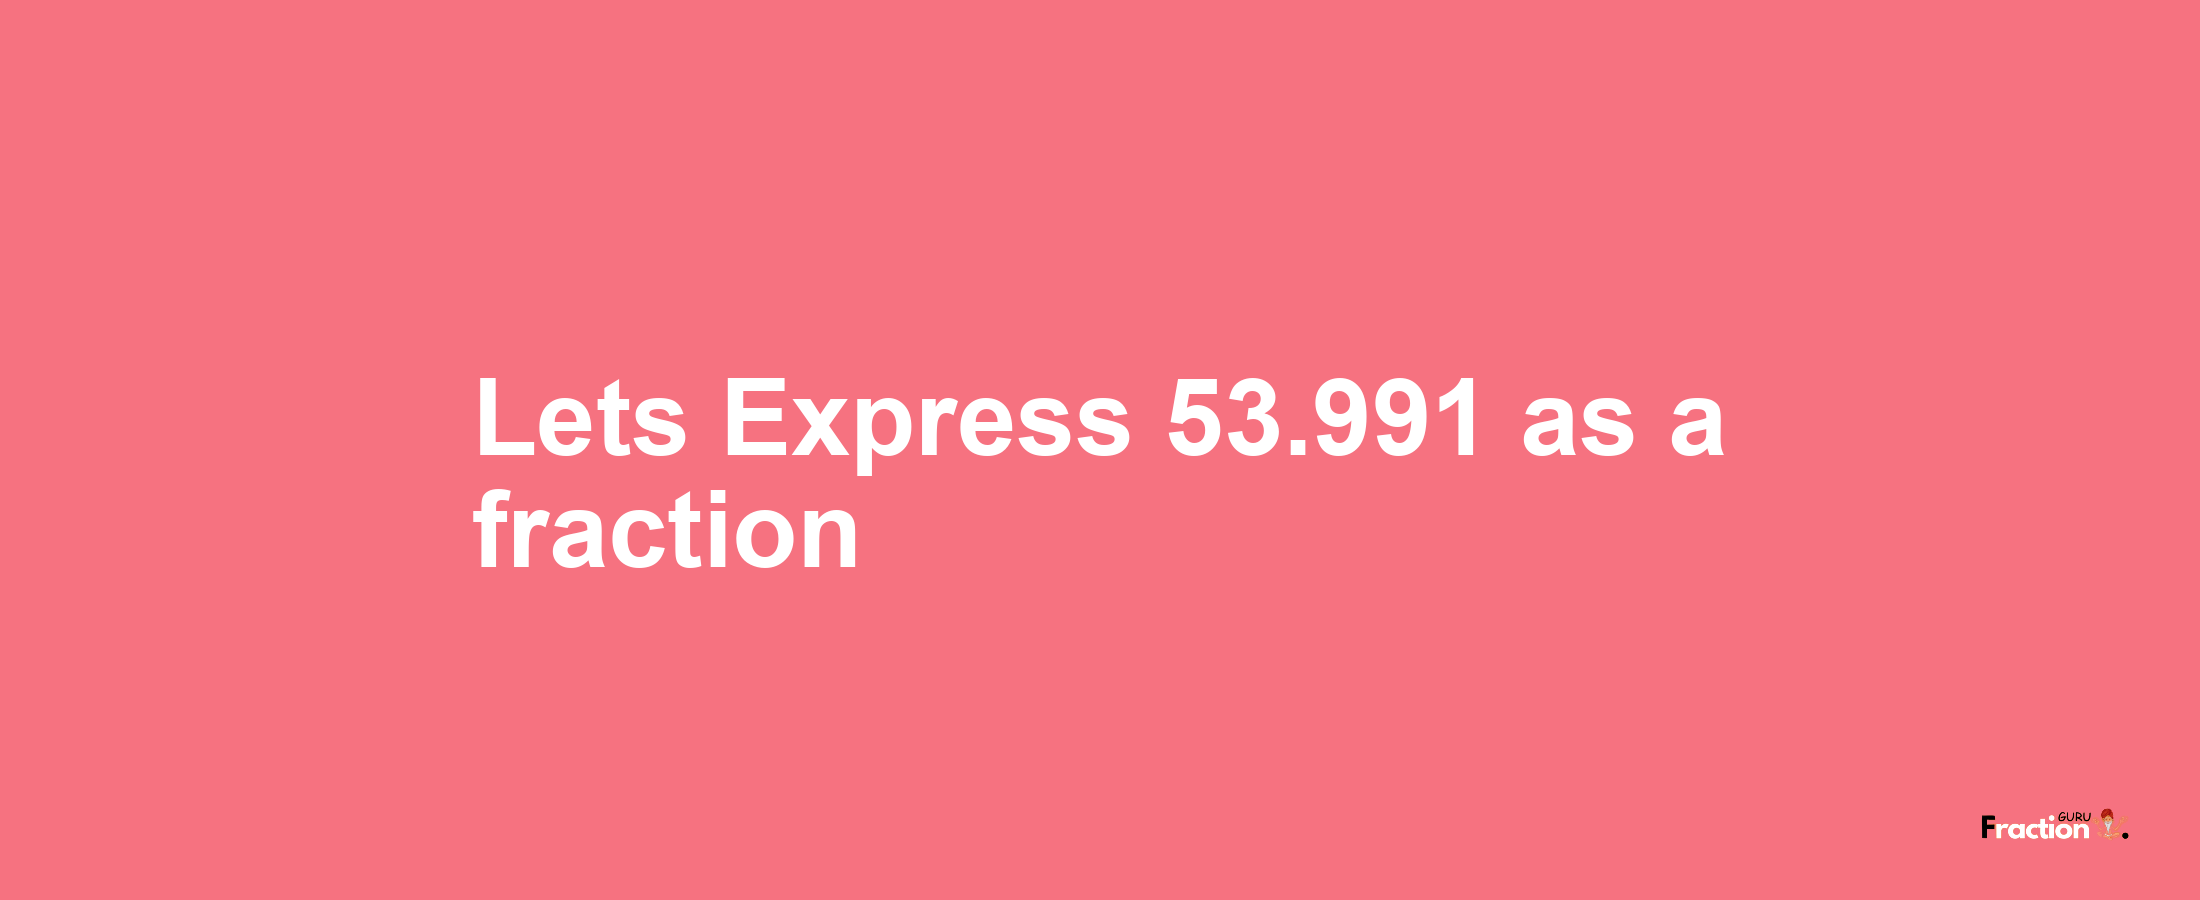 Lets Express 53.991 as afraction